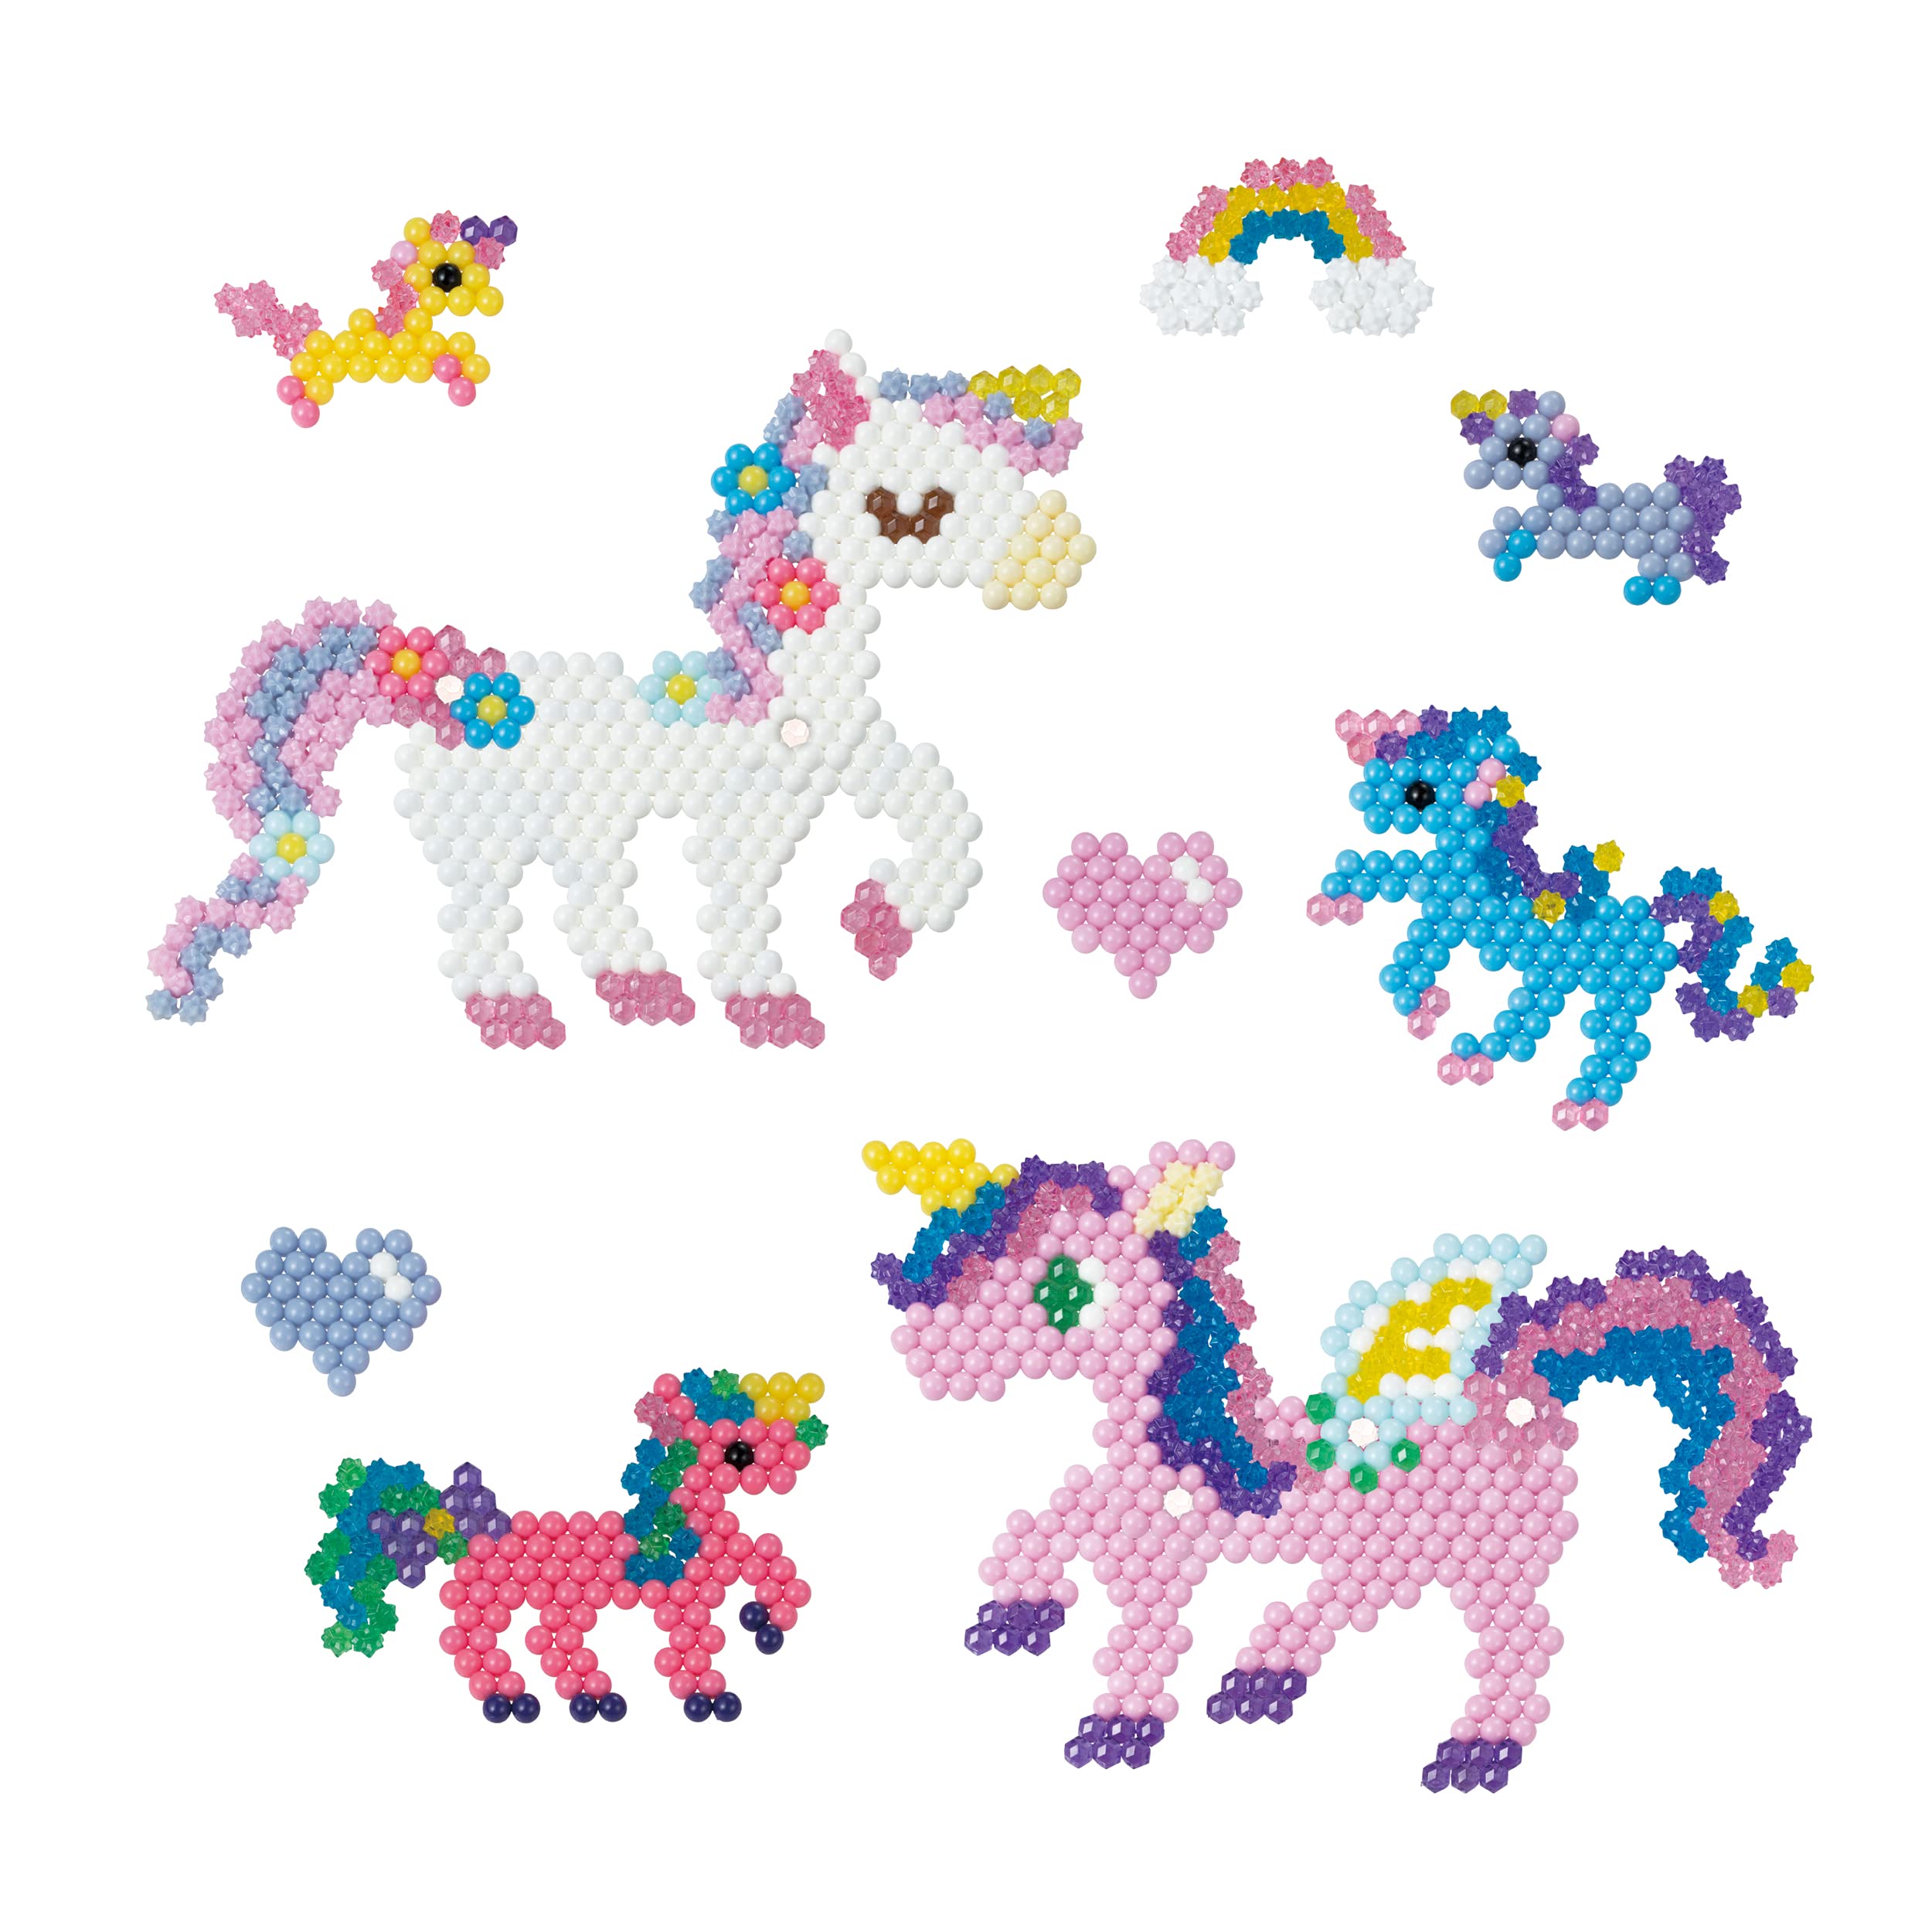 Aquabeads Mystic Unicorn Set, Complete Arts & Crafts Bead Kit for Children - Over 1,500 Beads, Three Keychains and Display Stand